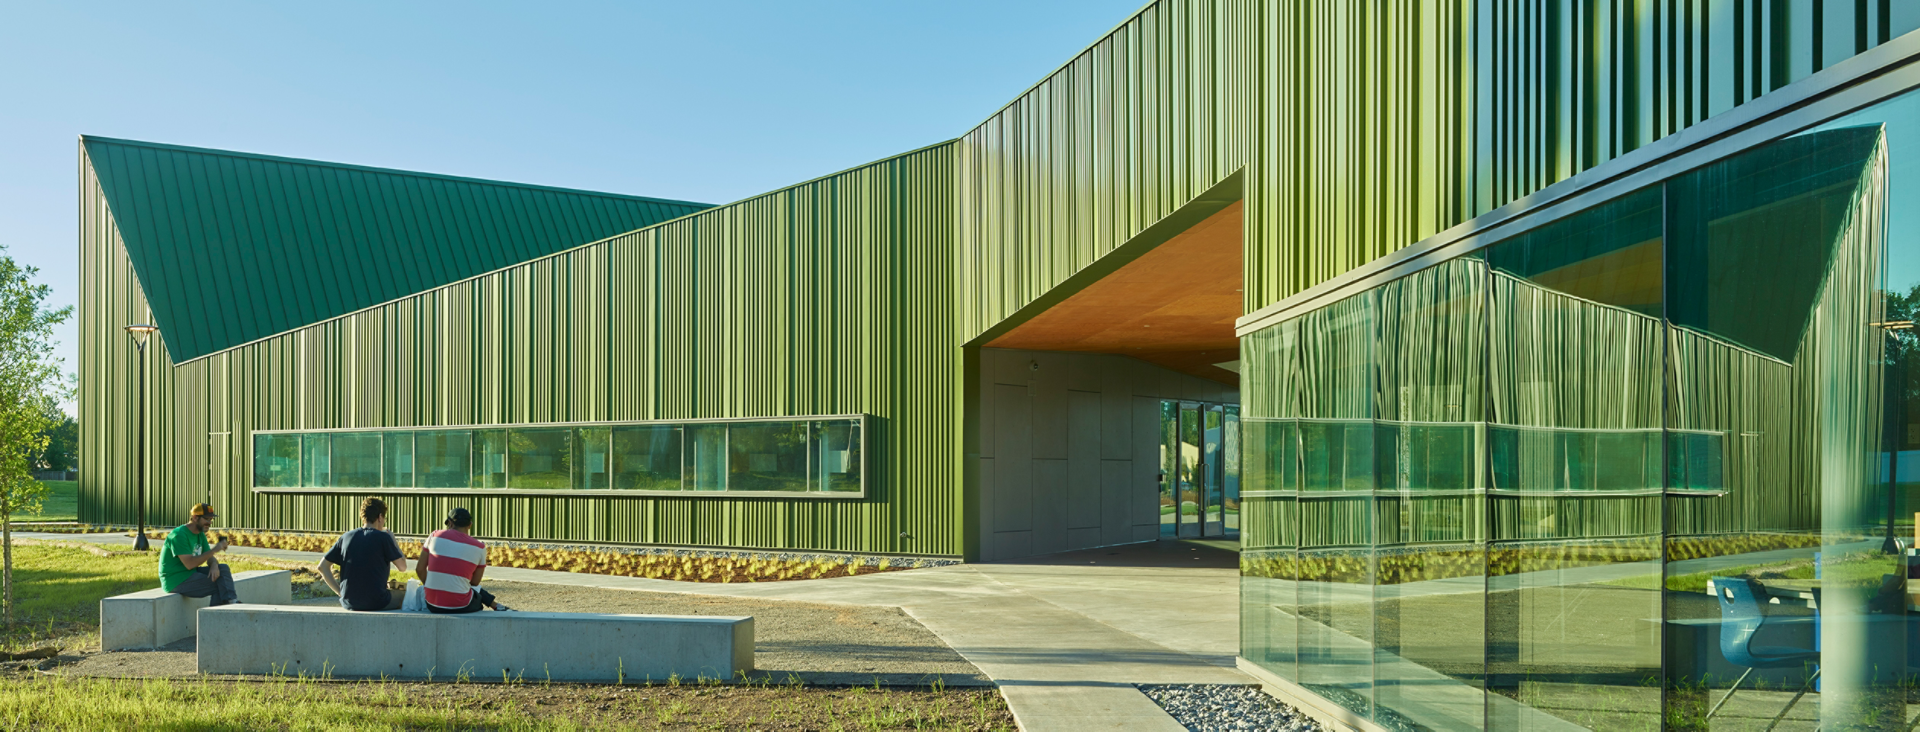 Exterior of Thaden school Reels and Wheels building in brilliant green metal with undulating roof in front of cloudless blue sky, students seated on cement benches in courtyard.